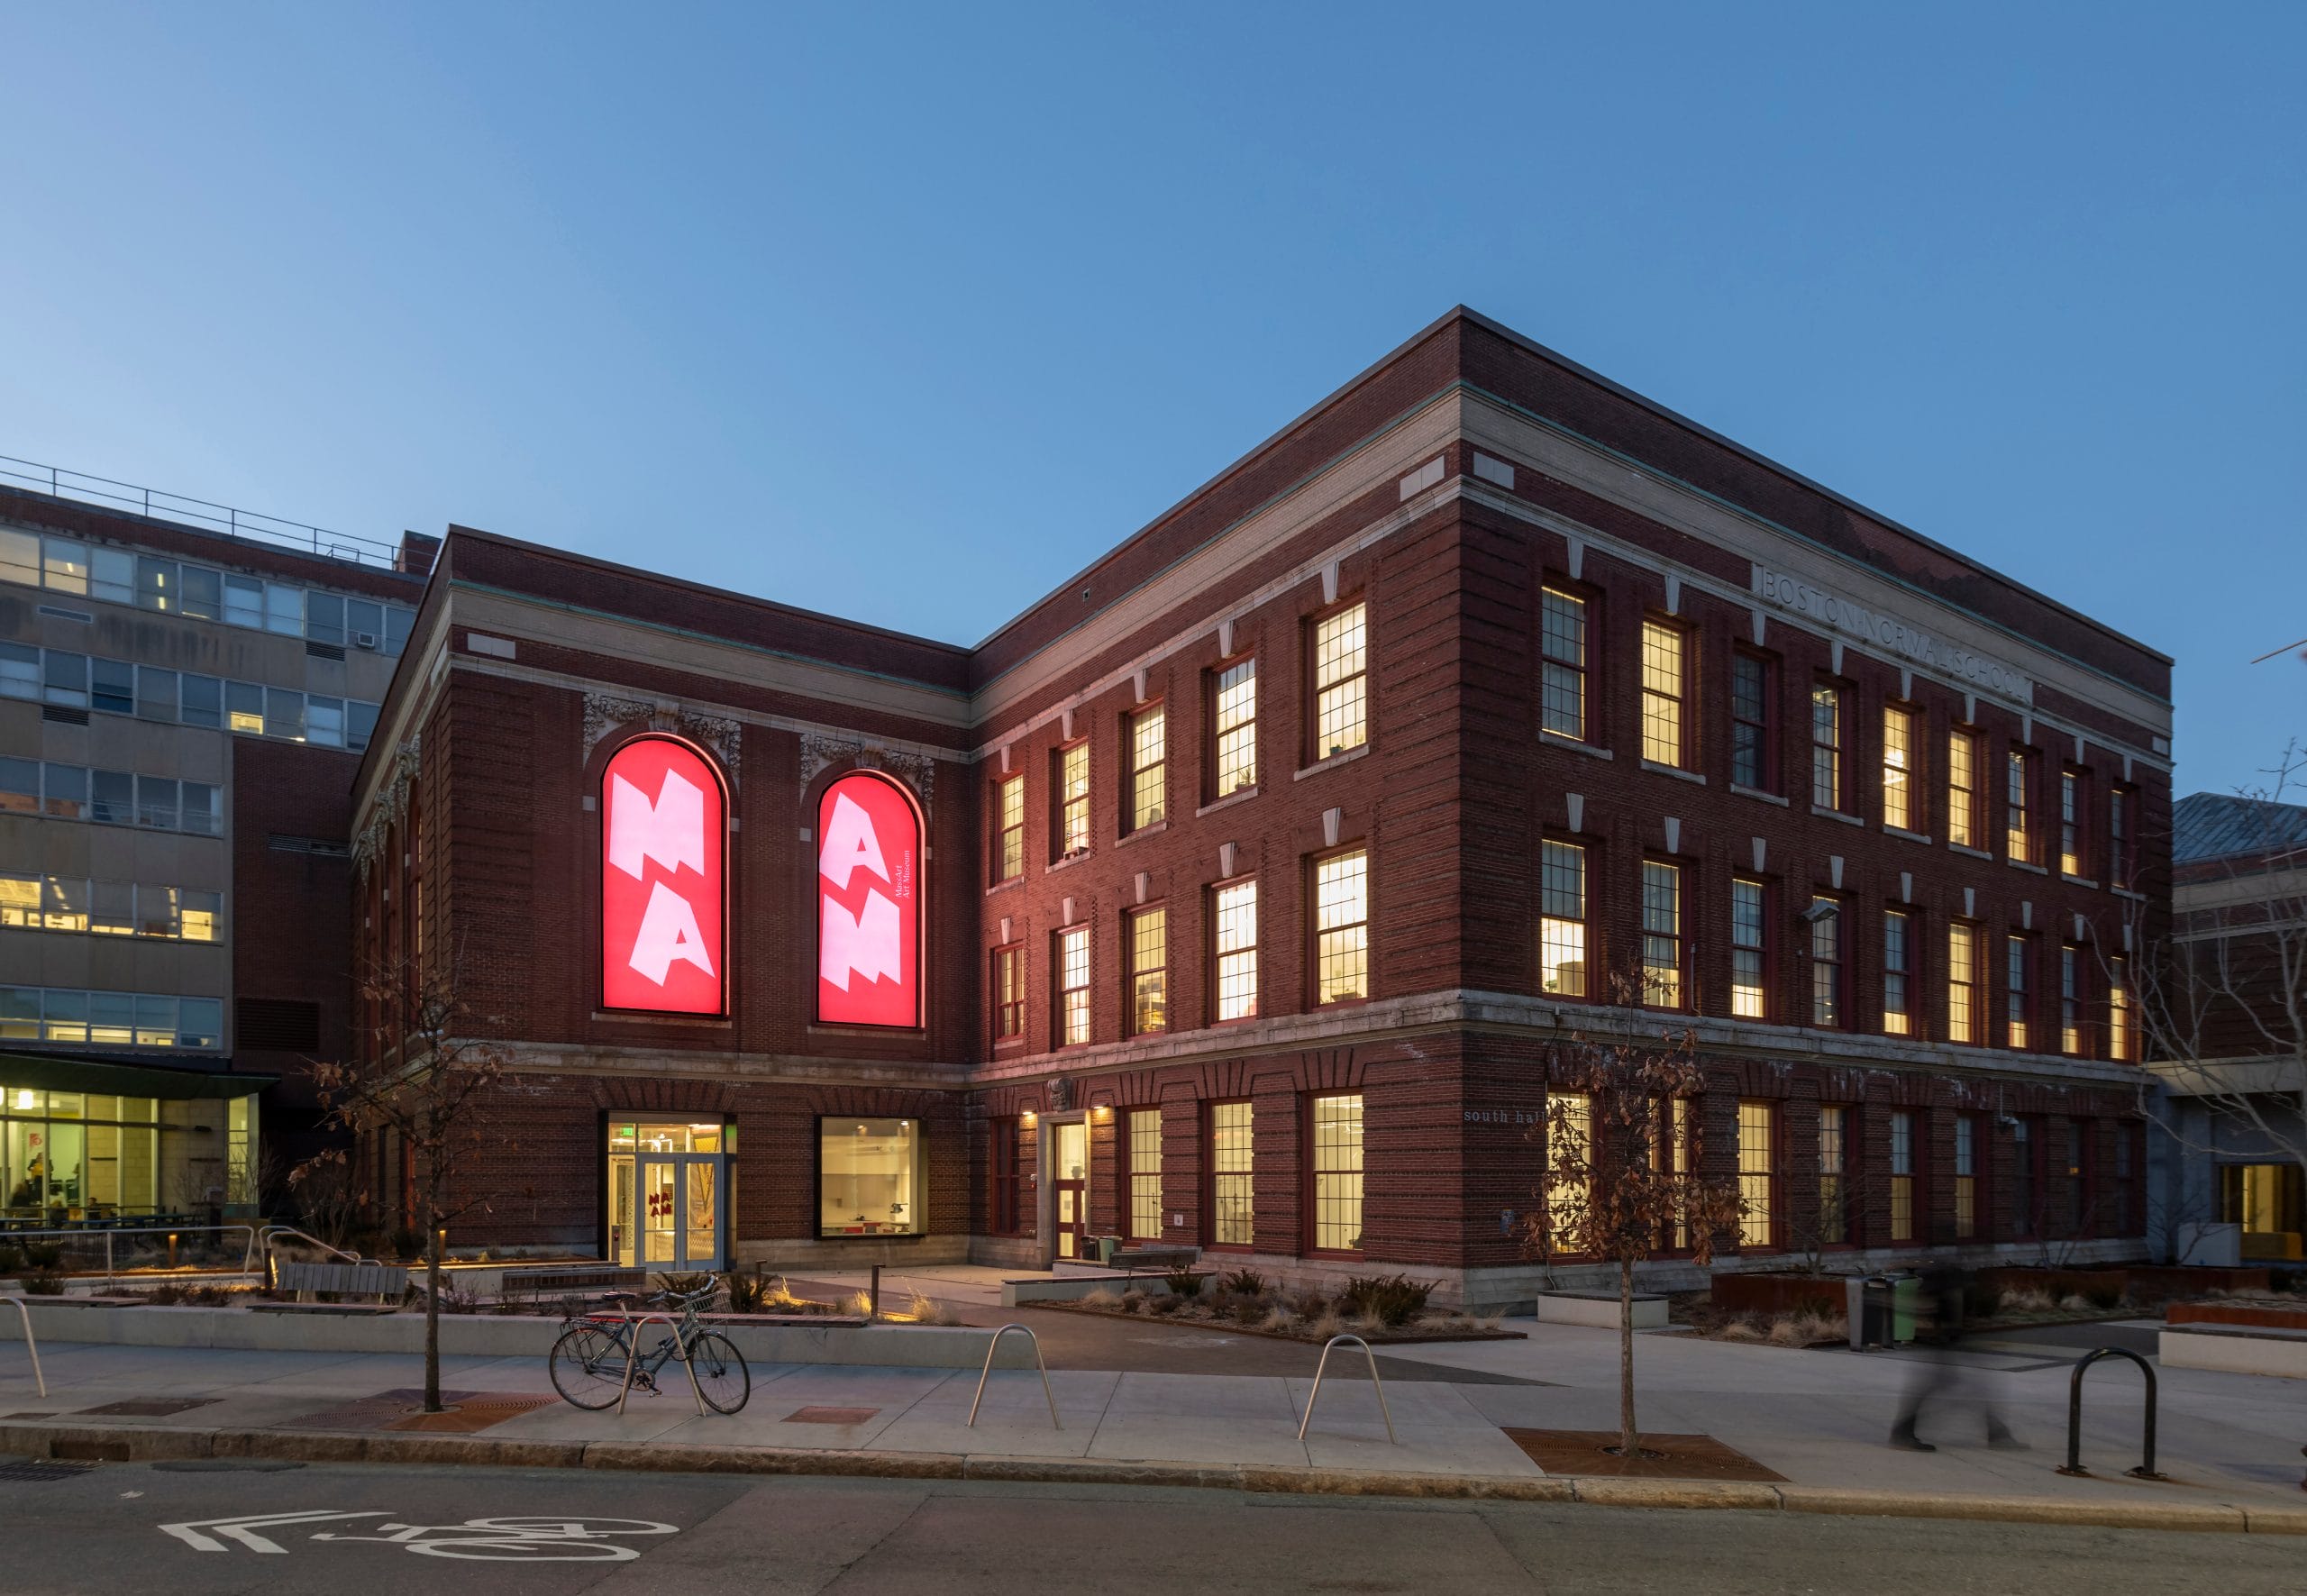 Exterior of a brick building at dusk with large red illuminated signs displaying "MAAM". The building has numerous windows, some lit from within.